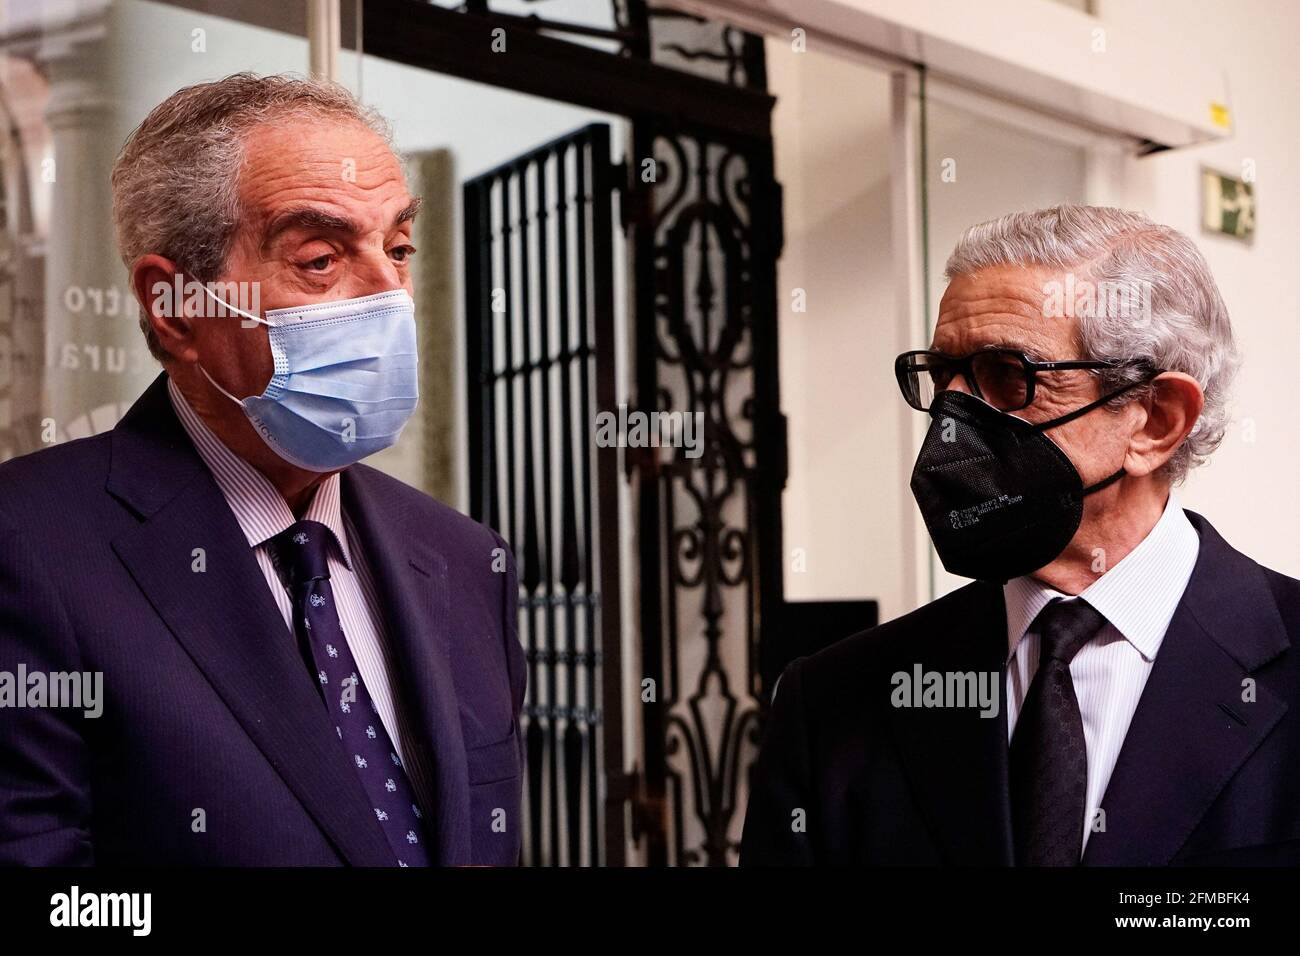 Malaga, Spain. 07th May, 2021. Former Mayor of Malaga, Luis Merino Bayona (l) and President of Fundacion Unicaja, Braulio Medel having a conversation during the exhibition at Centro Cultural Fundacion Unicaja. 'Un siglo de esplendor' is an exhibition that shows the artistic heritage of the Holy Week brotherhoods of Malaga and is one of the events organized by Agrupacion de Cofradias de Semana Santa de Malaga for the centenary of the institution. Credit: SOPA Images Limited/Alamy Live News Stock Photo